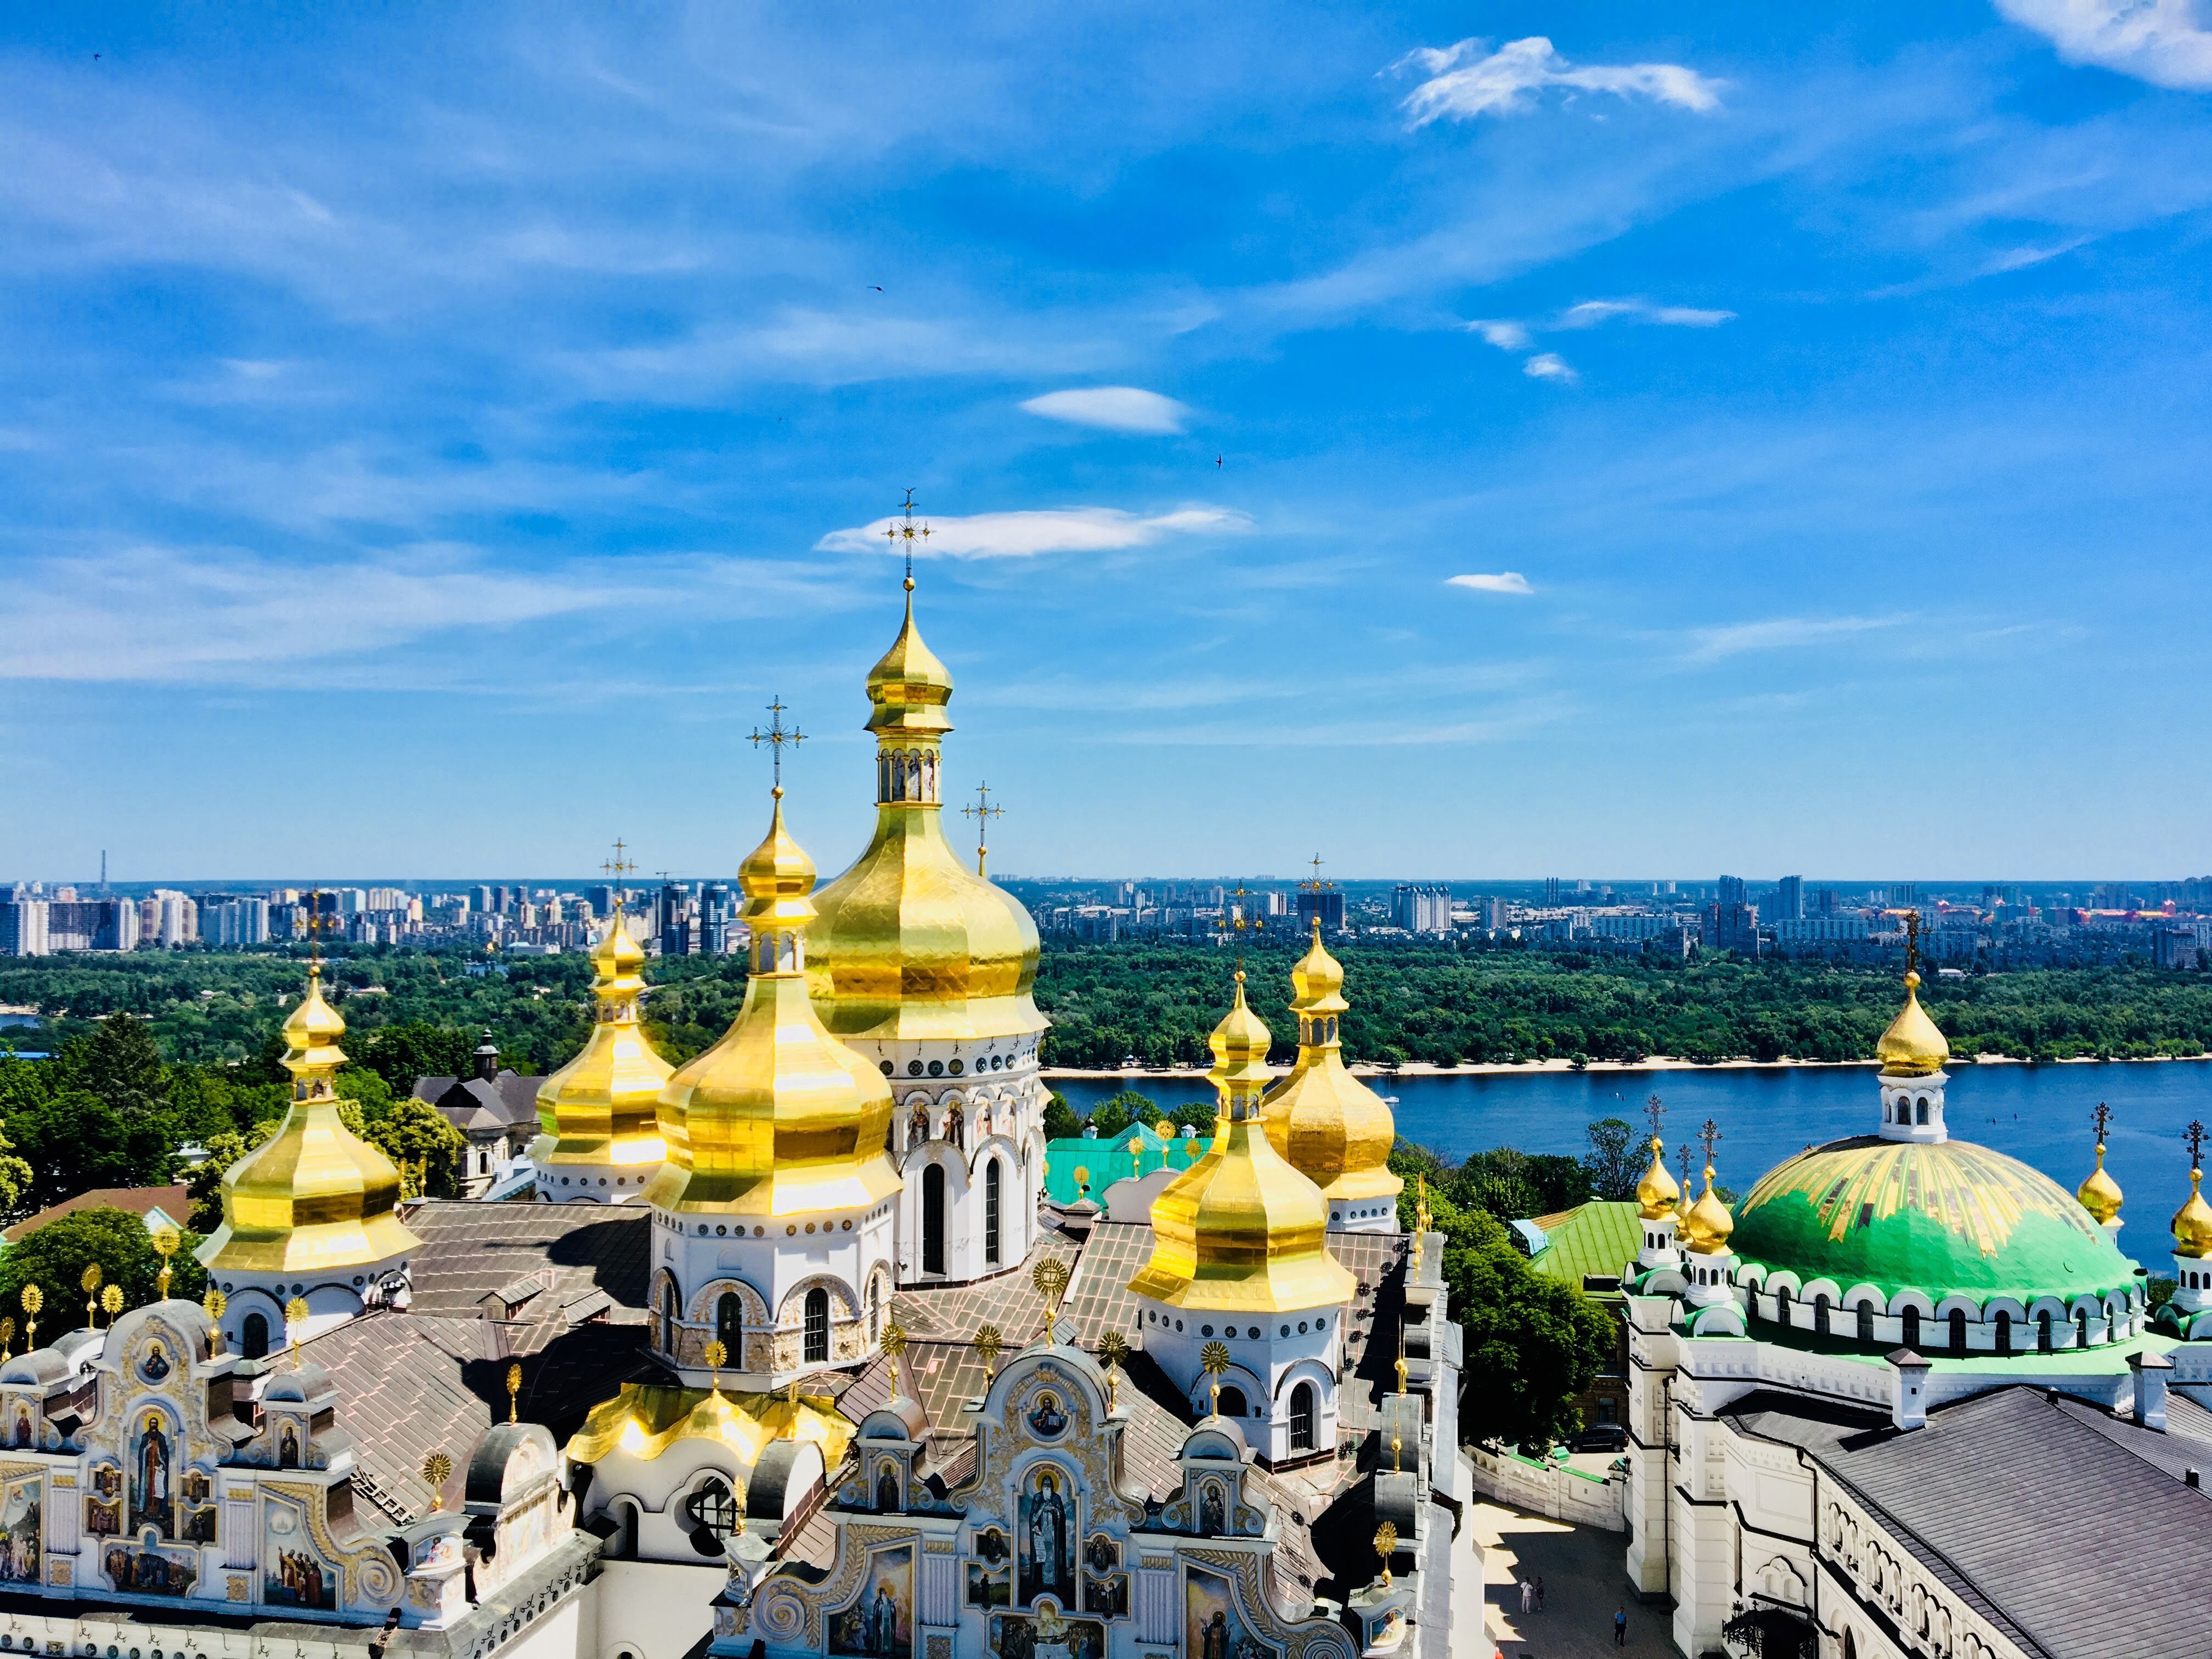 Aerial View Of Kyiv With Its Iconic Landmarks And Dnieper River